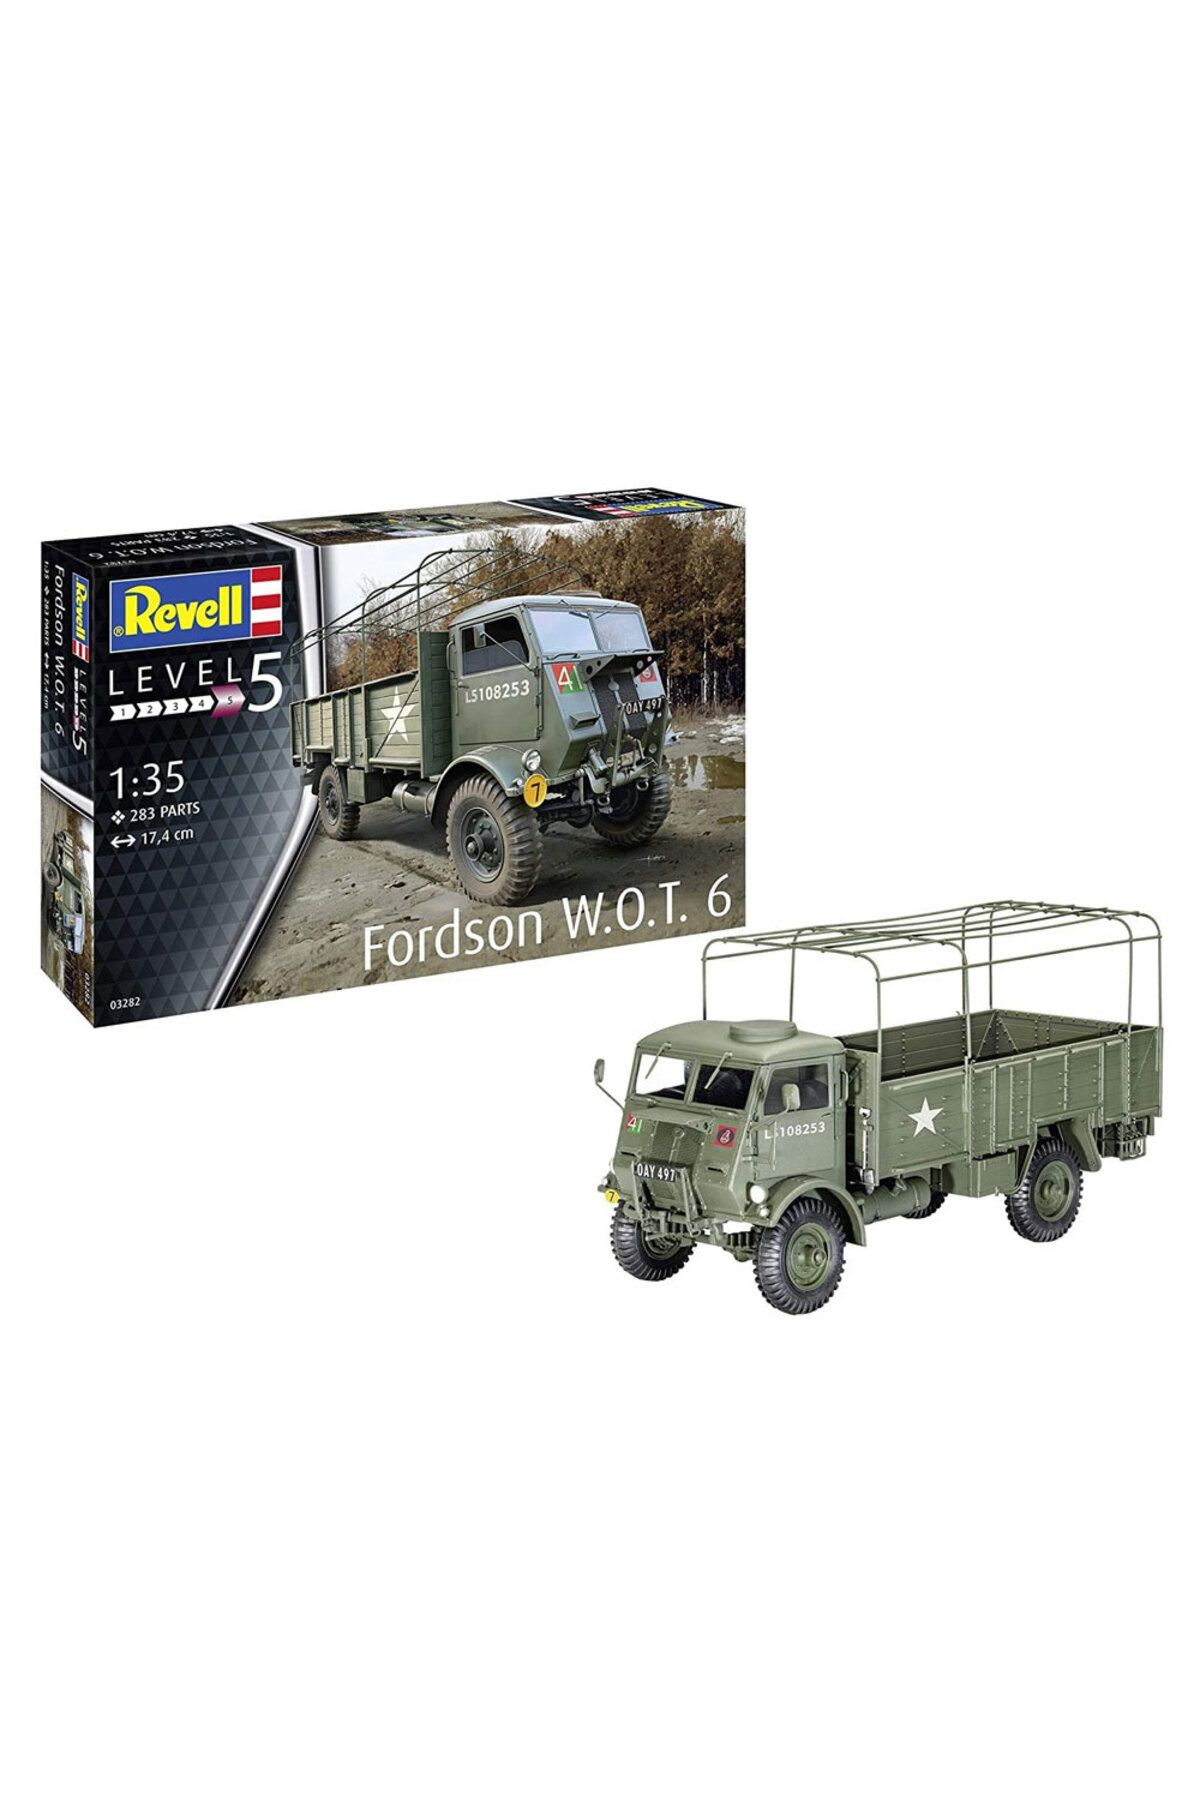 REVELL Fordson W.o.t. 6 1/35